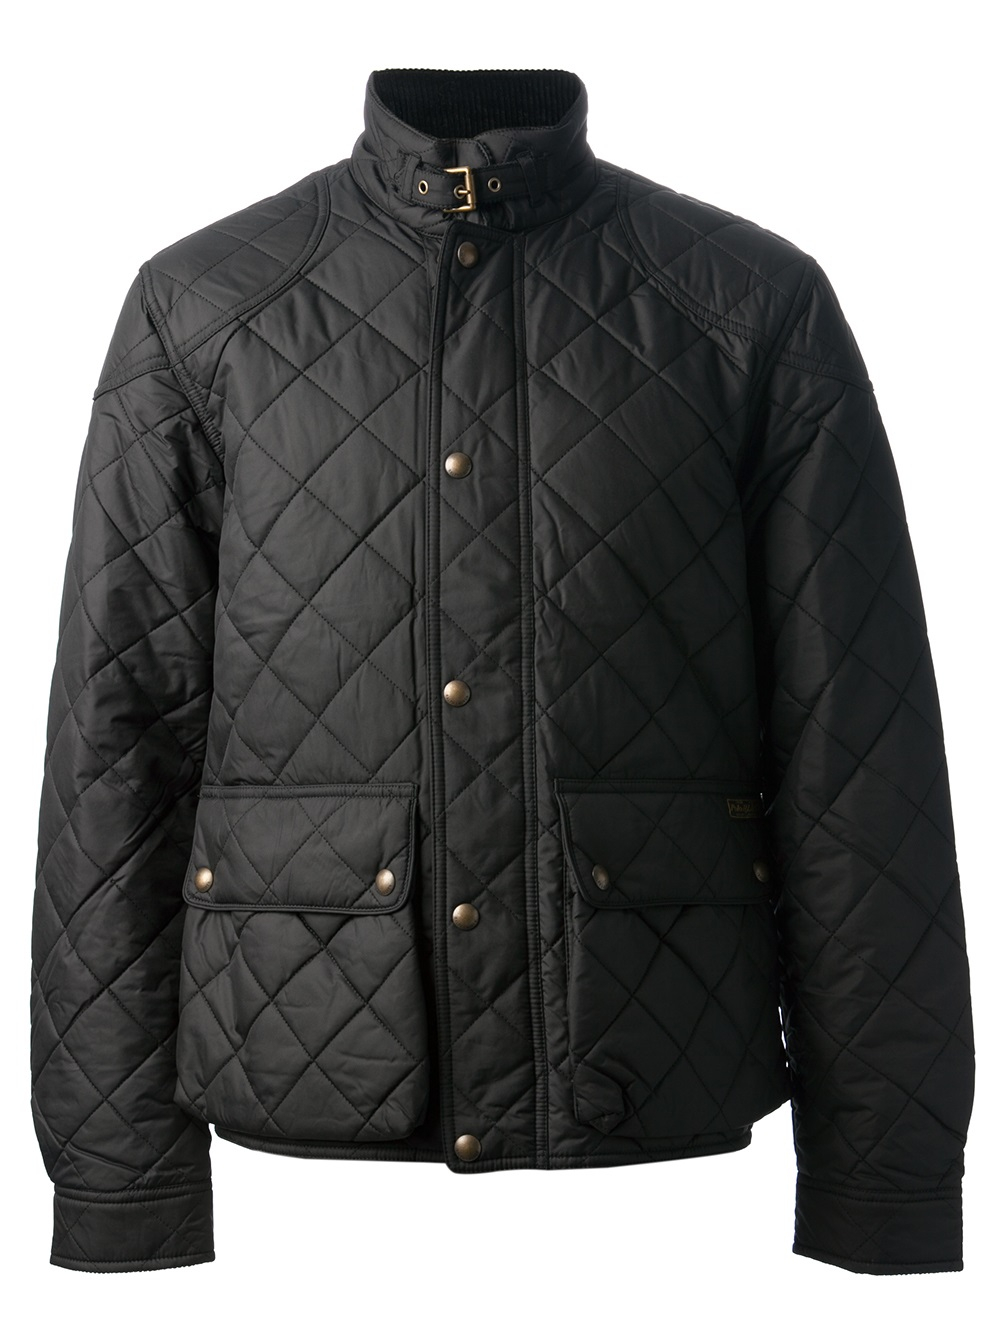 Polo Ralph Lauren Cadwell Quilted Bomber Jacket in Black for Men - Lyst